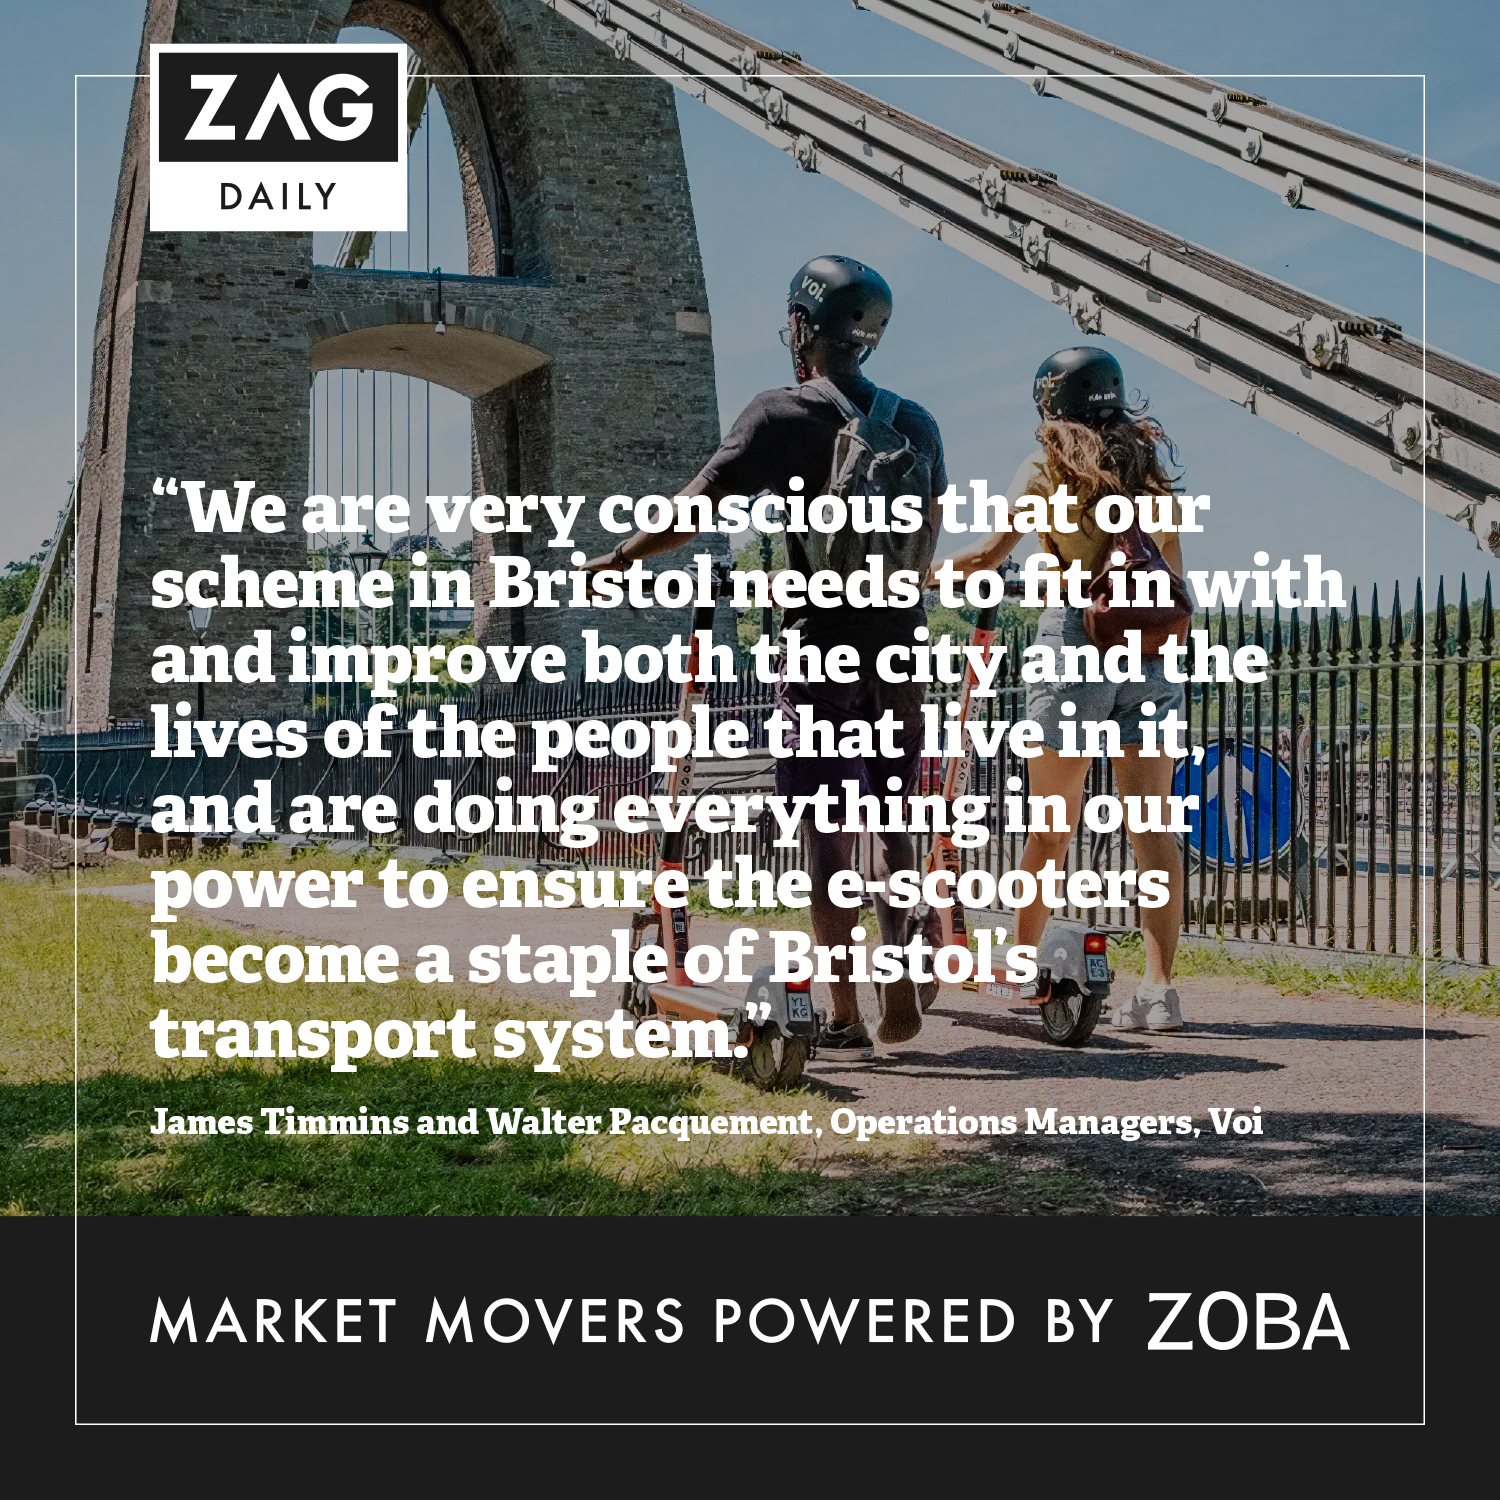 Market Movers Powered by Zoba